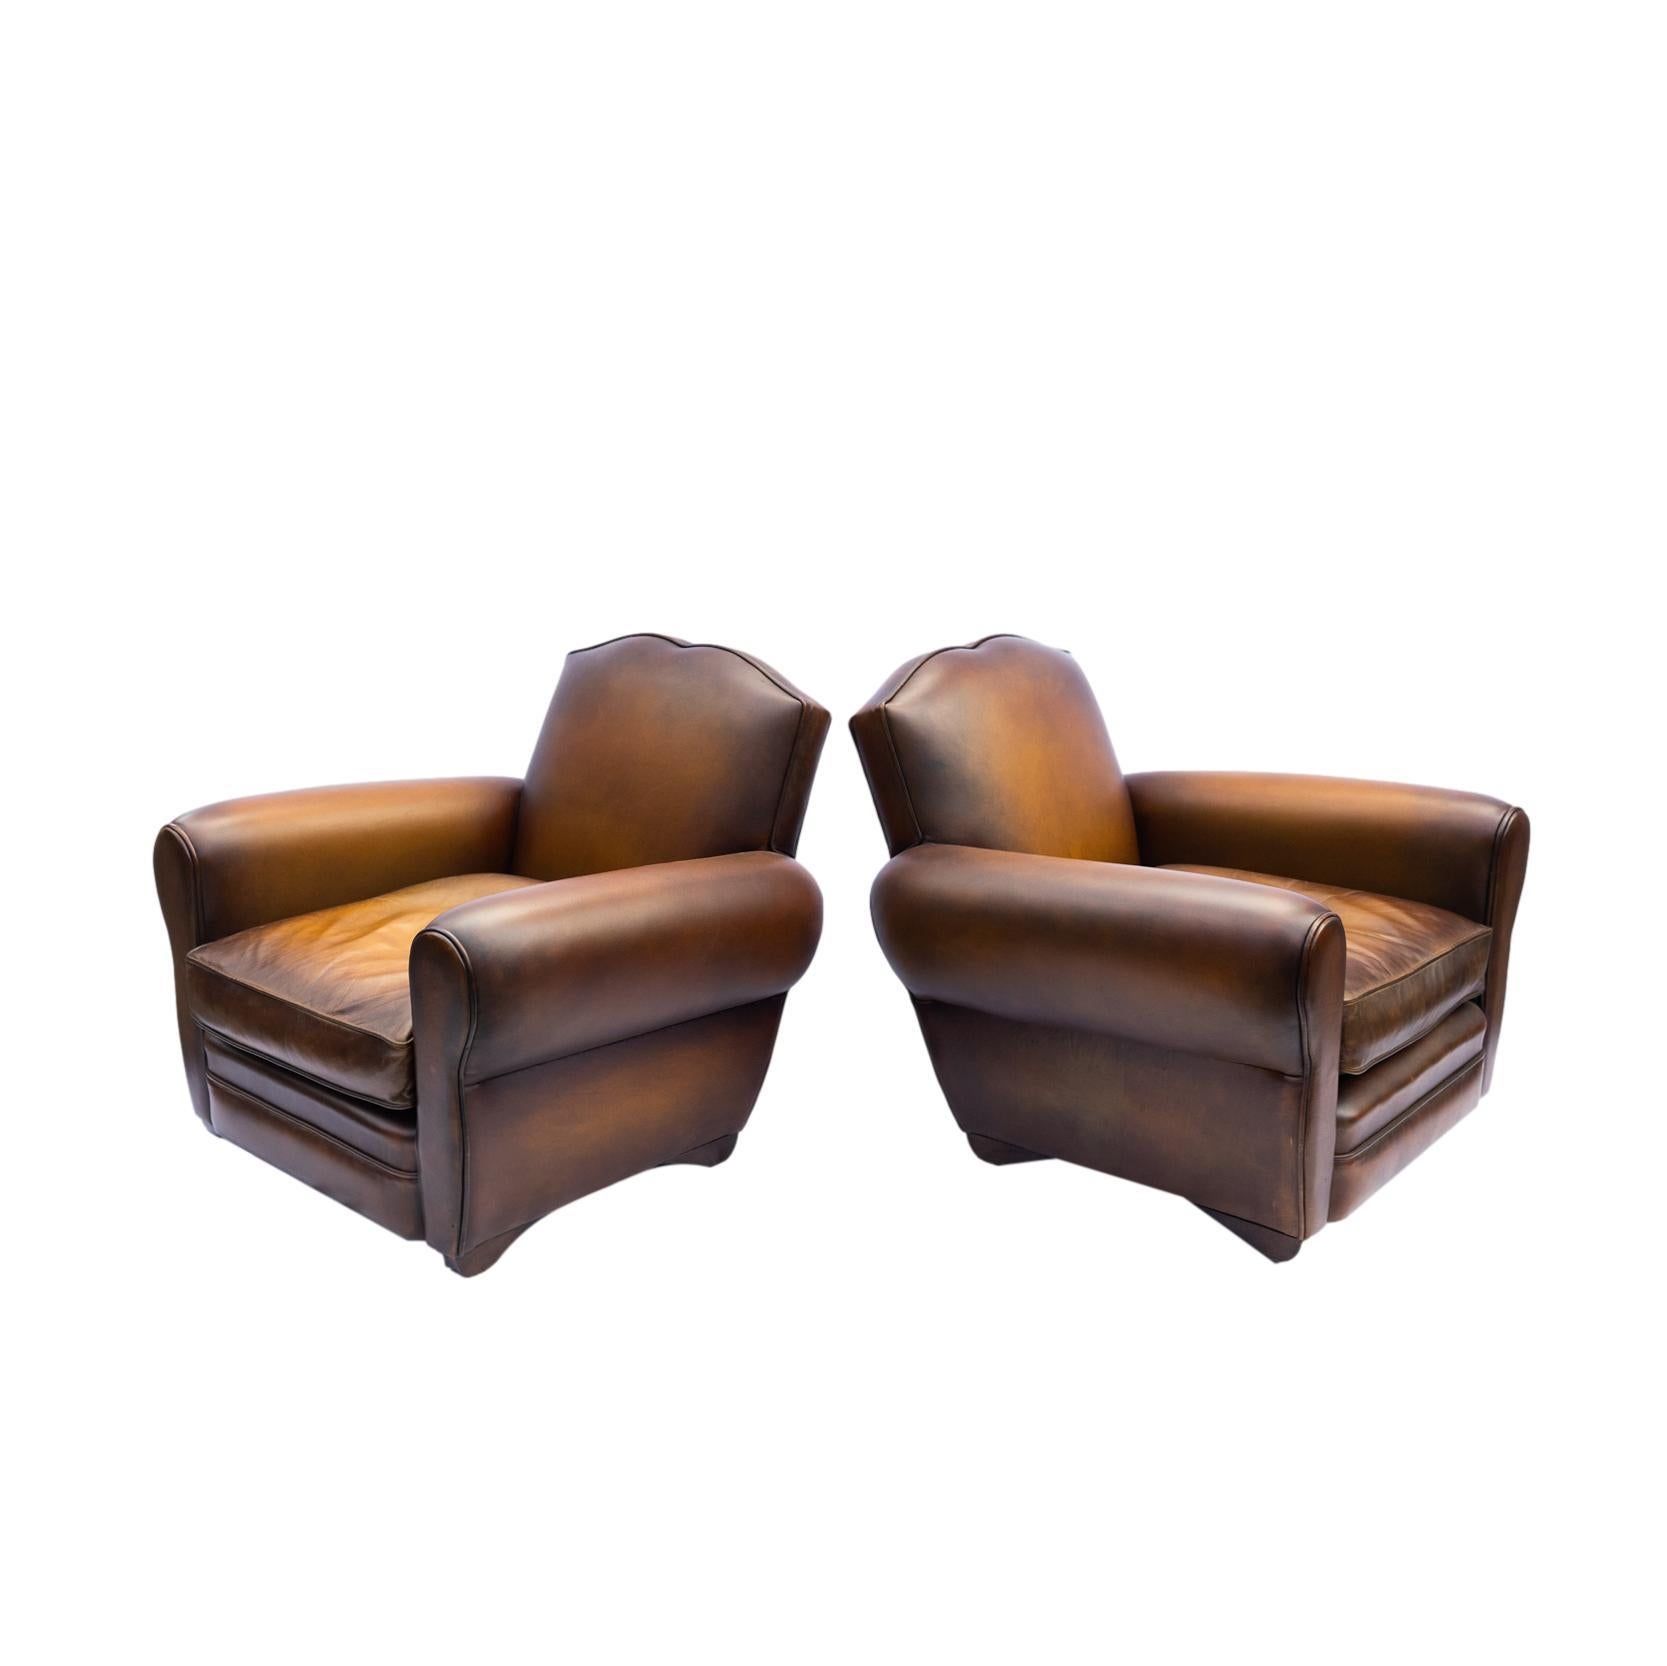 Pair of Art Deco Leather Club Chairs with Mustache Backs, French, ca. 1935 4